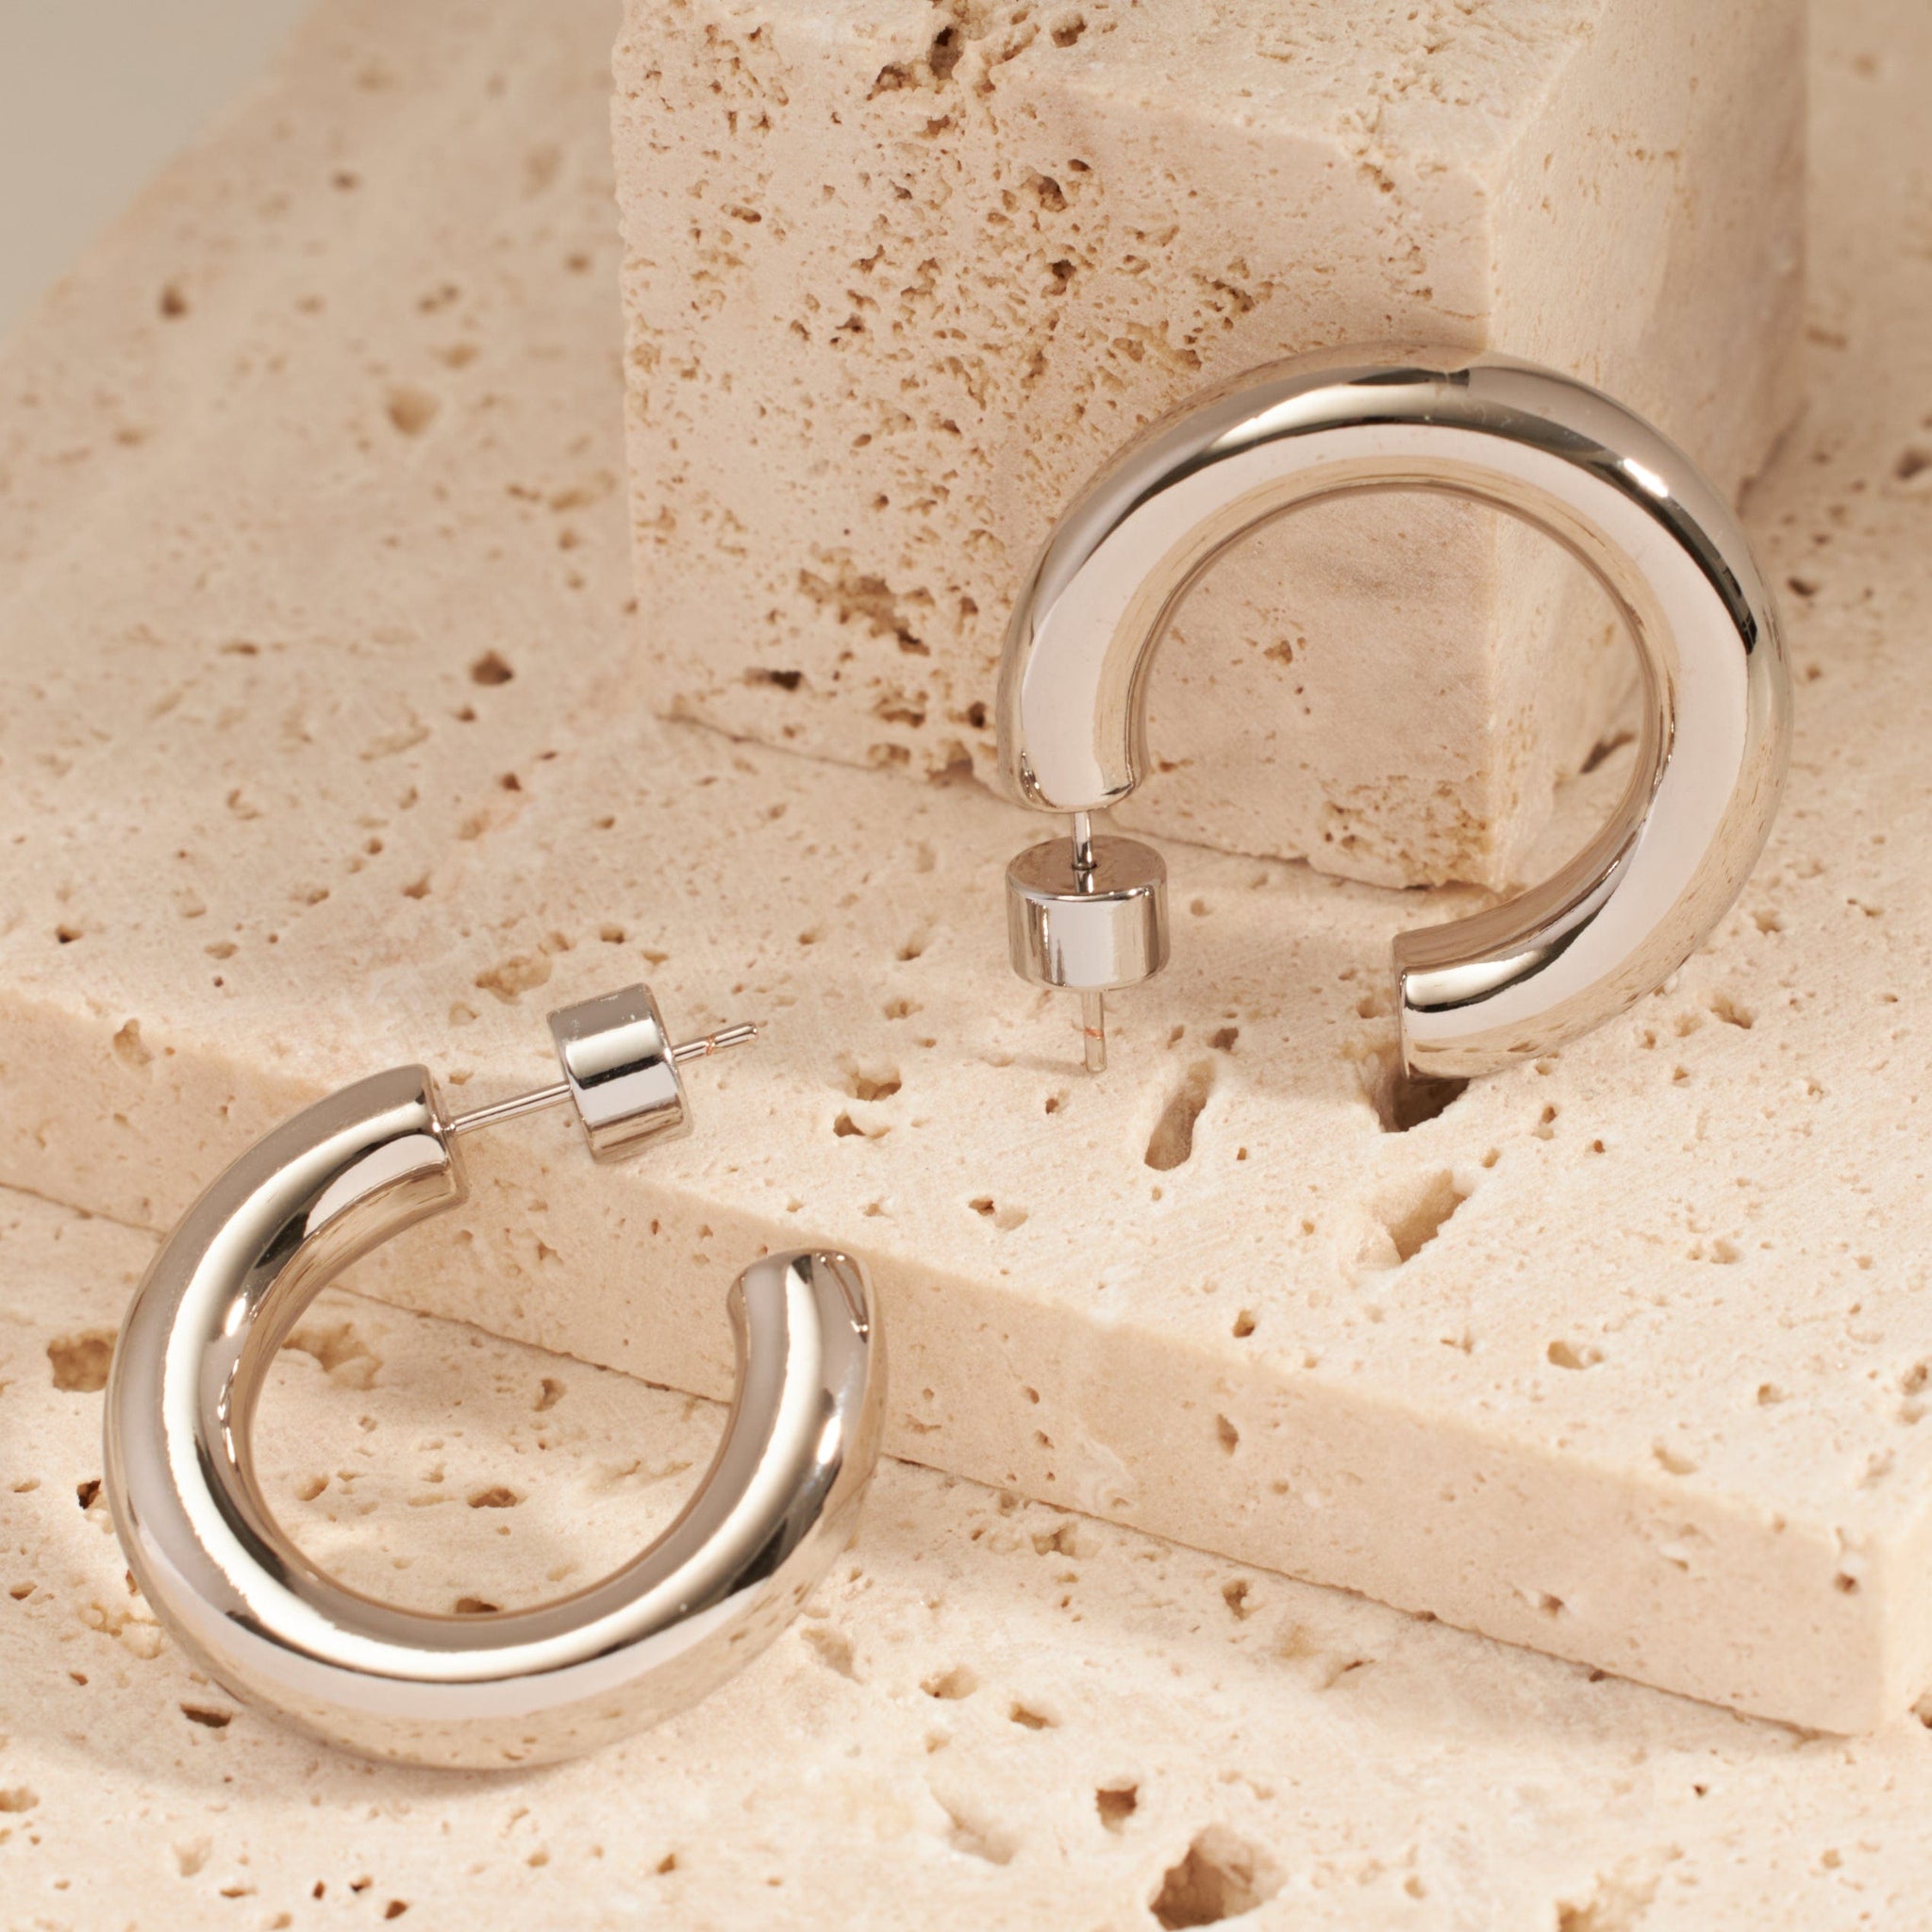 Two platinum Perfect Hoop earrings are displayed side by side, the perfectly round, open hoops reflecting the light on their smooth silver surfaces.